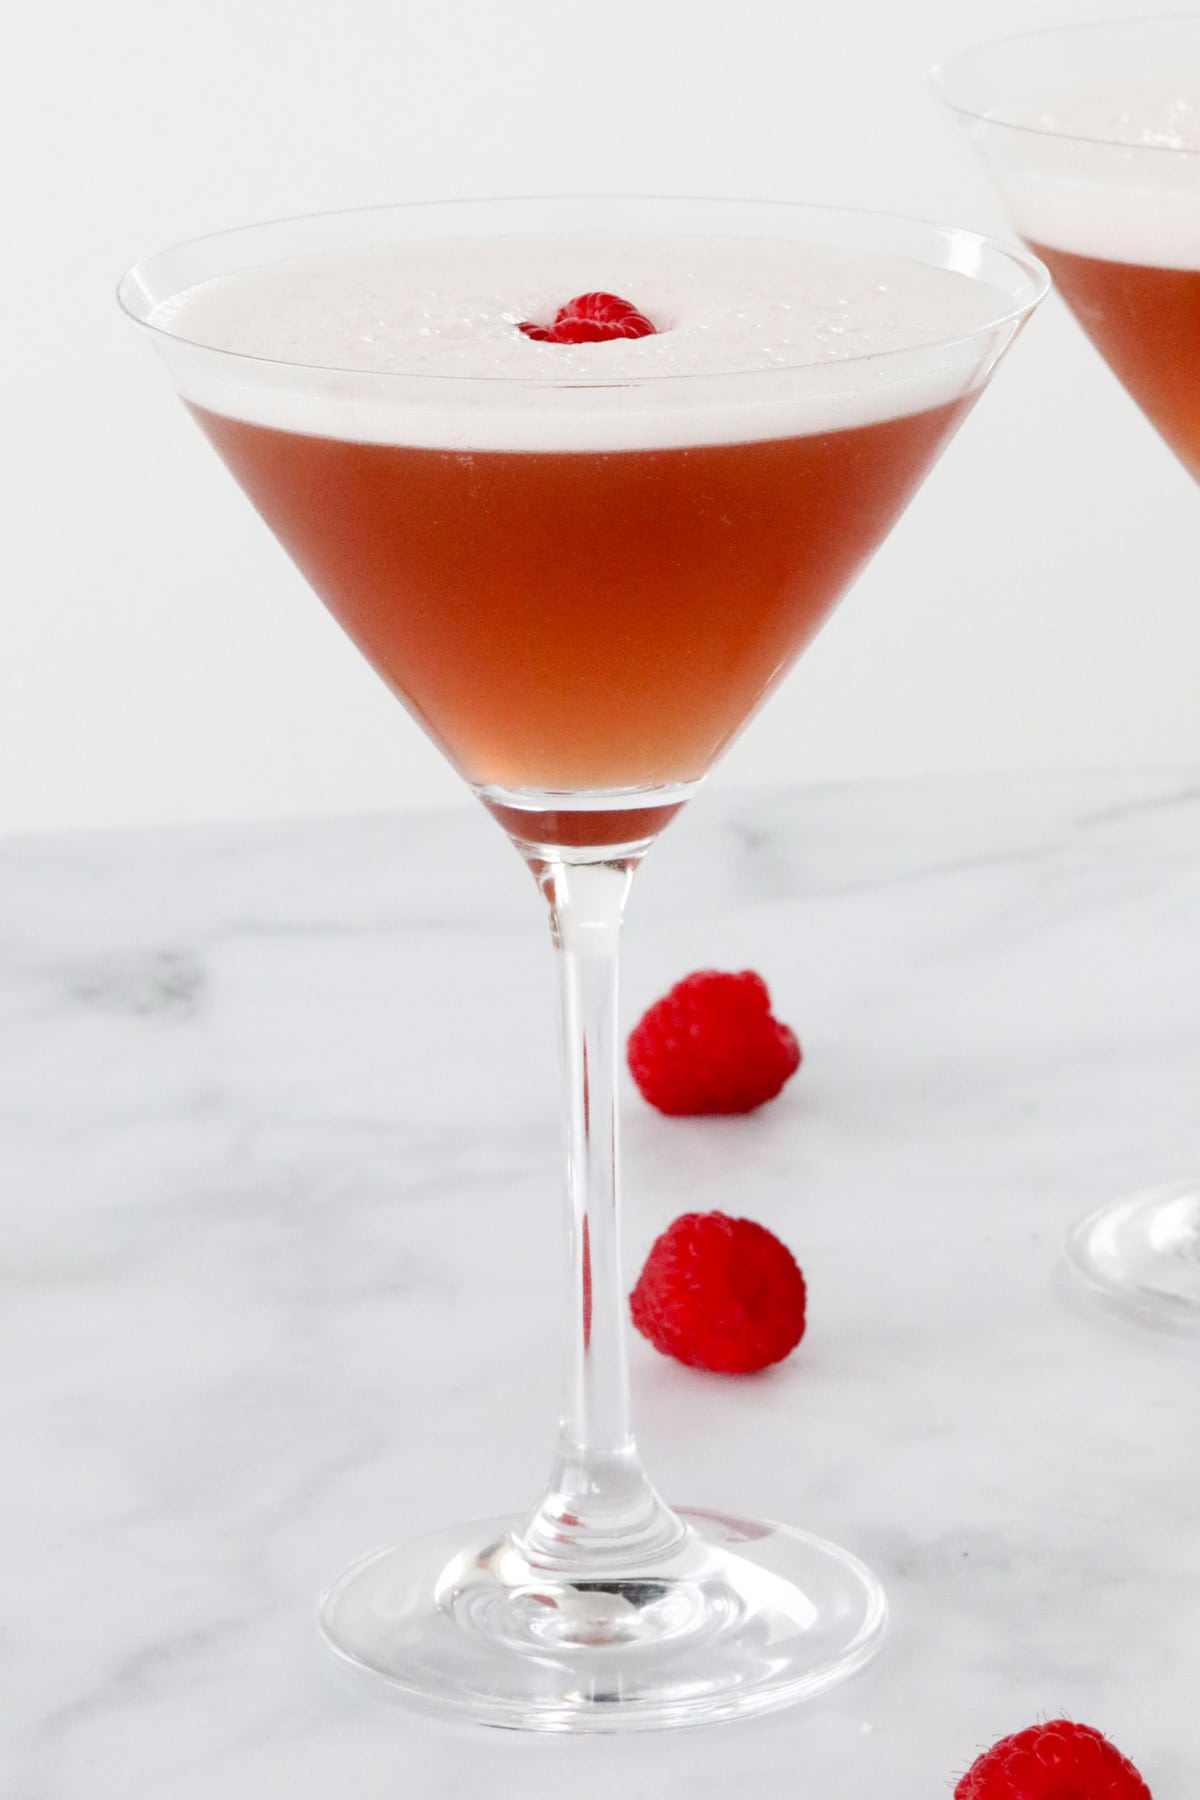 A cocktail glass filled with a french martini.